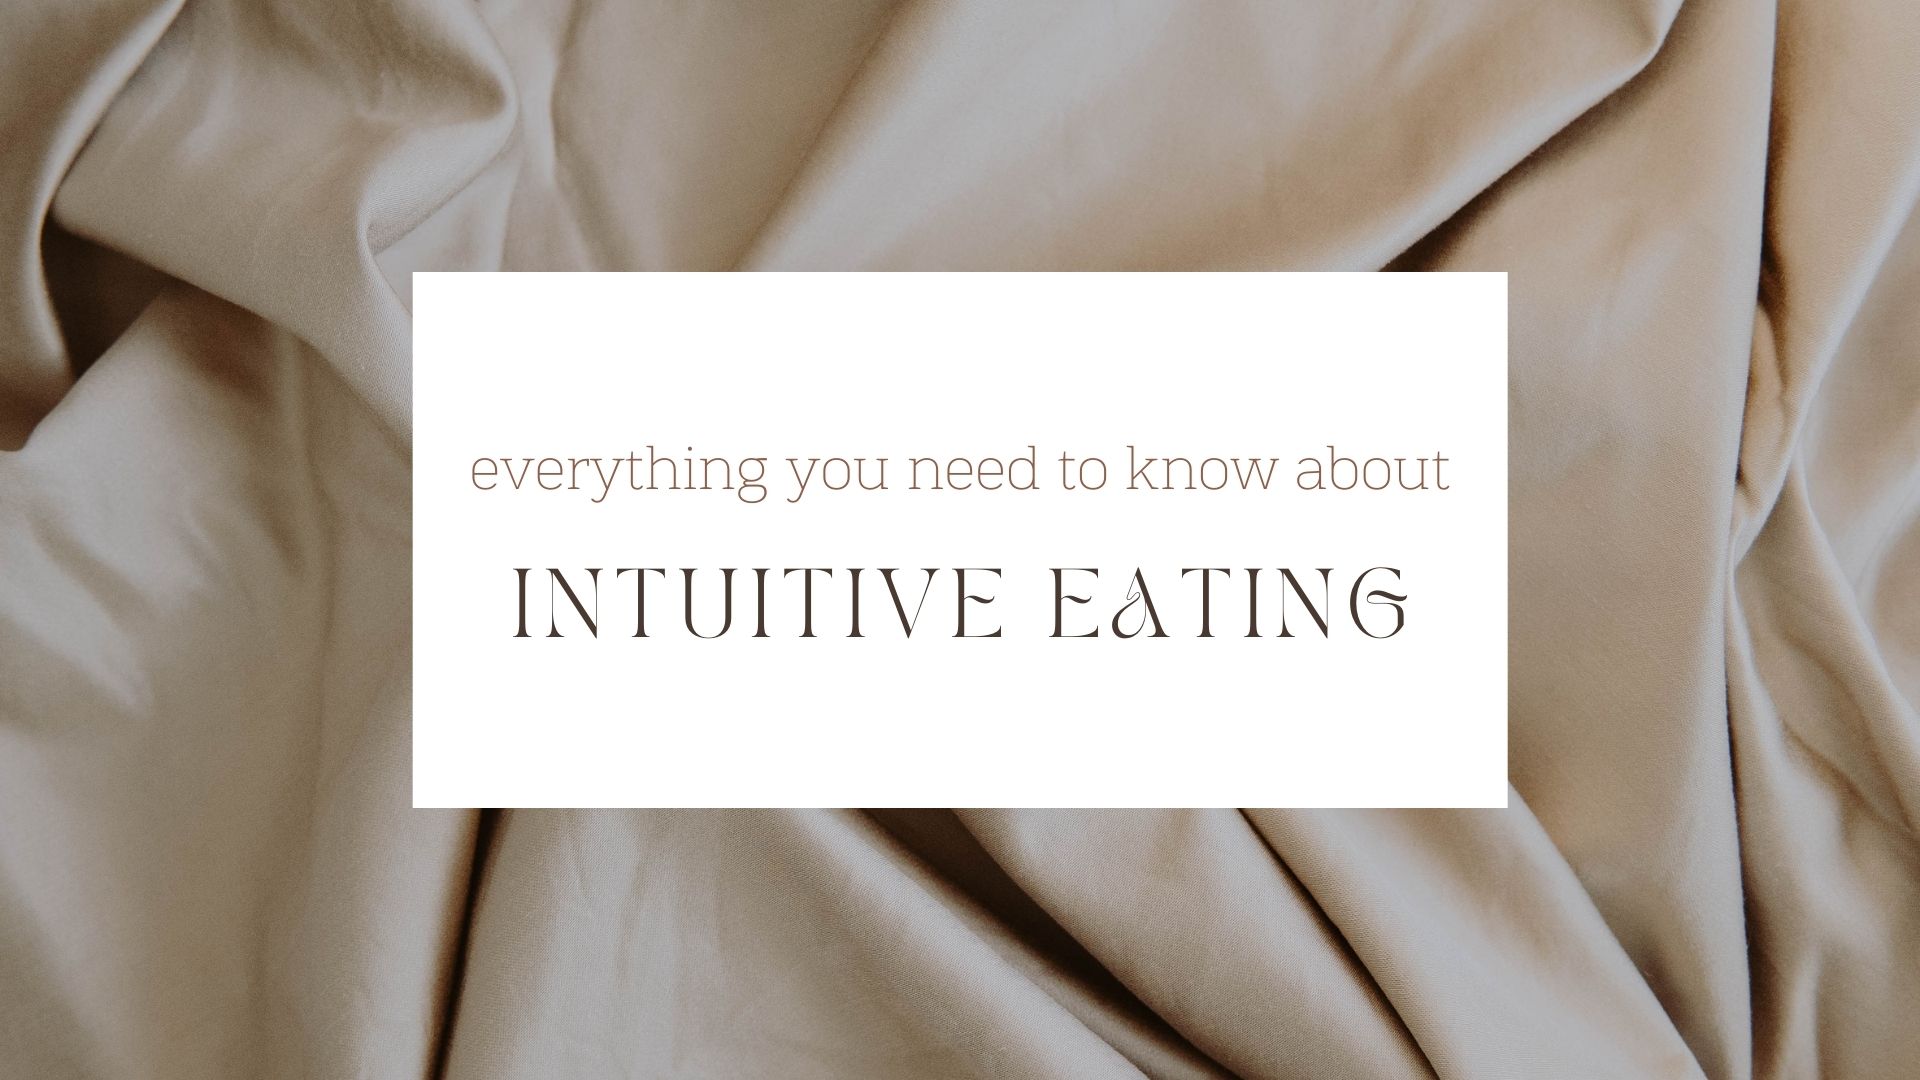 everything you need to know about intuitive eating intuitive eating dani schenone dani mari health intuitive eating counselor certified intuitive eating counselor yoga registered yoga teacher certified personal trainer fitness yoga health wellness